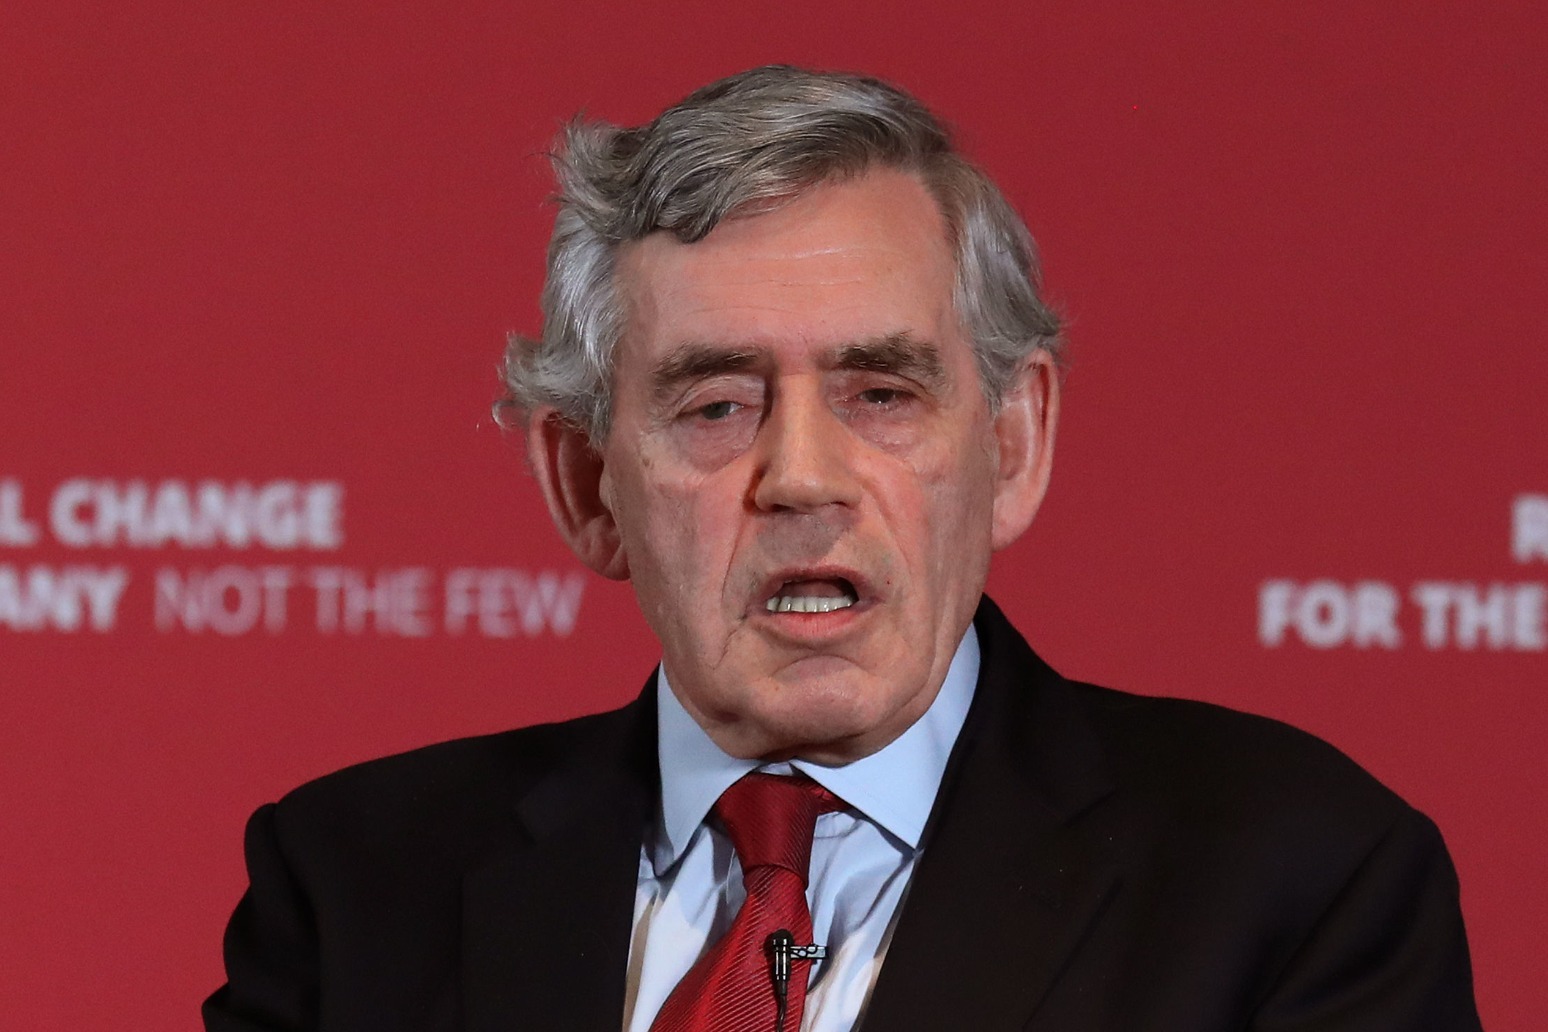 Support grows for Gordon Brown’s humanitarian campaign to help Afghanistan 